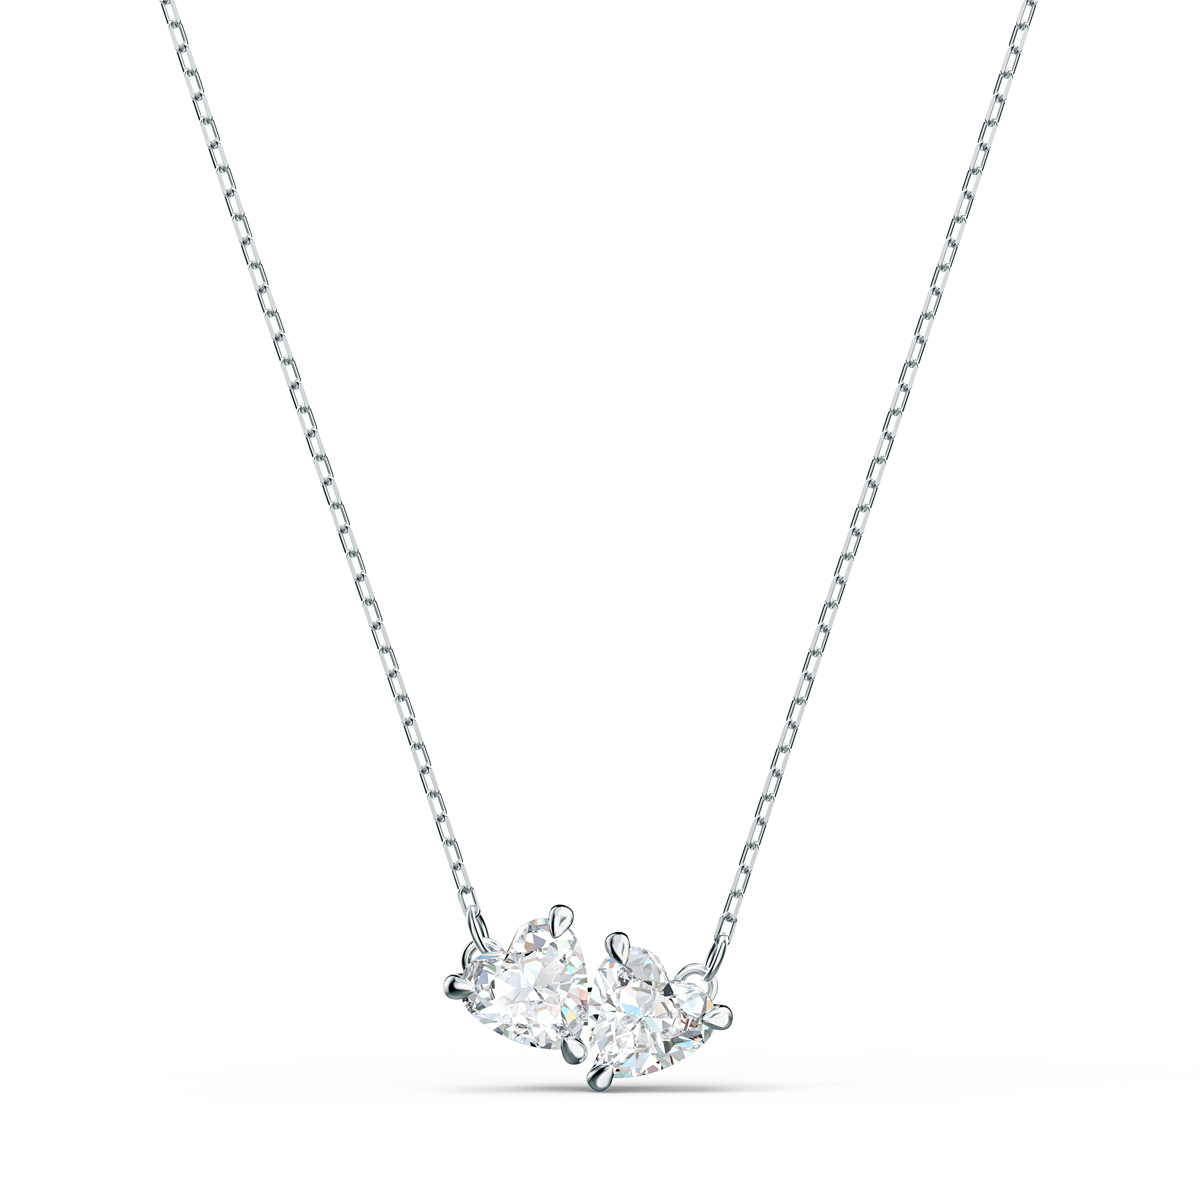 Swarovski Rhodium Silver and Crystal Attract Soul Heart Necklace